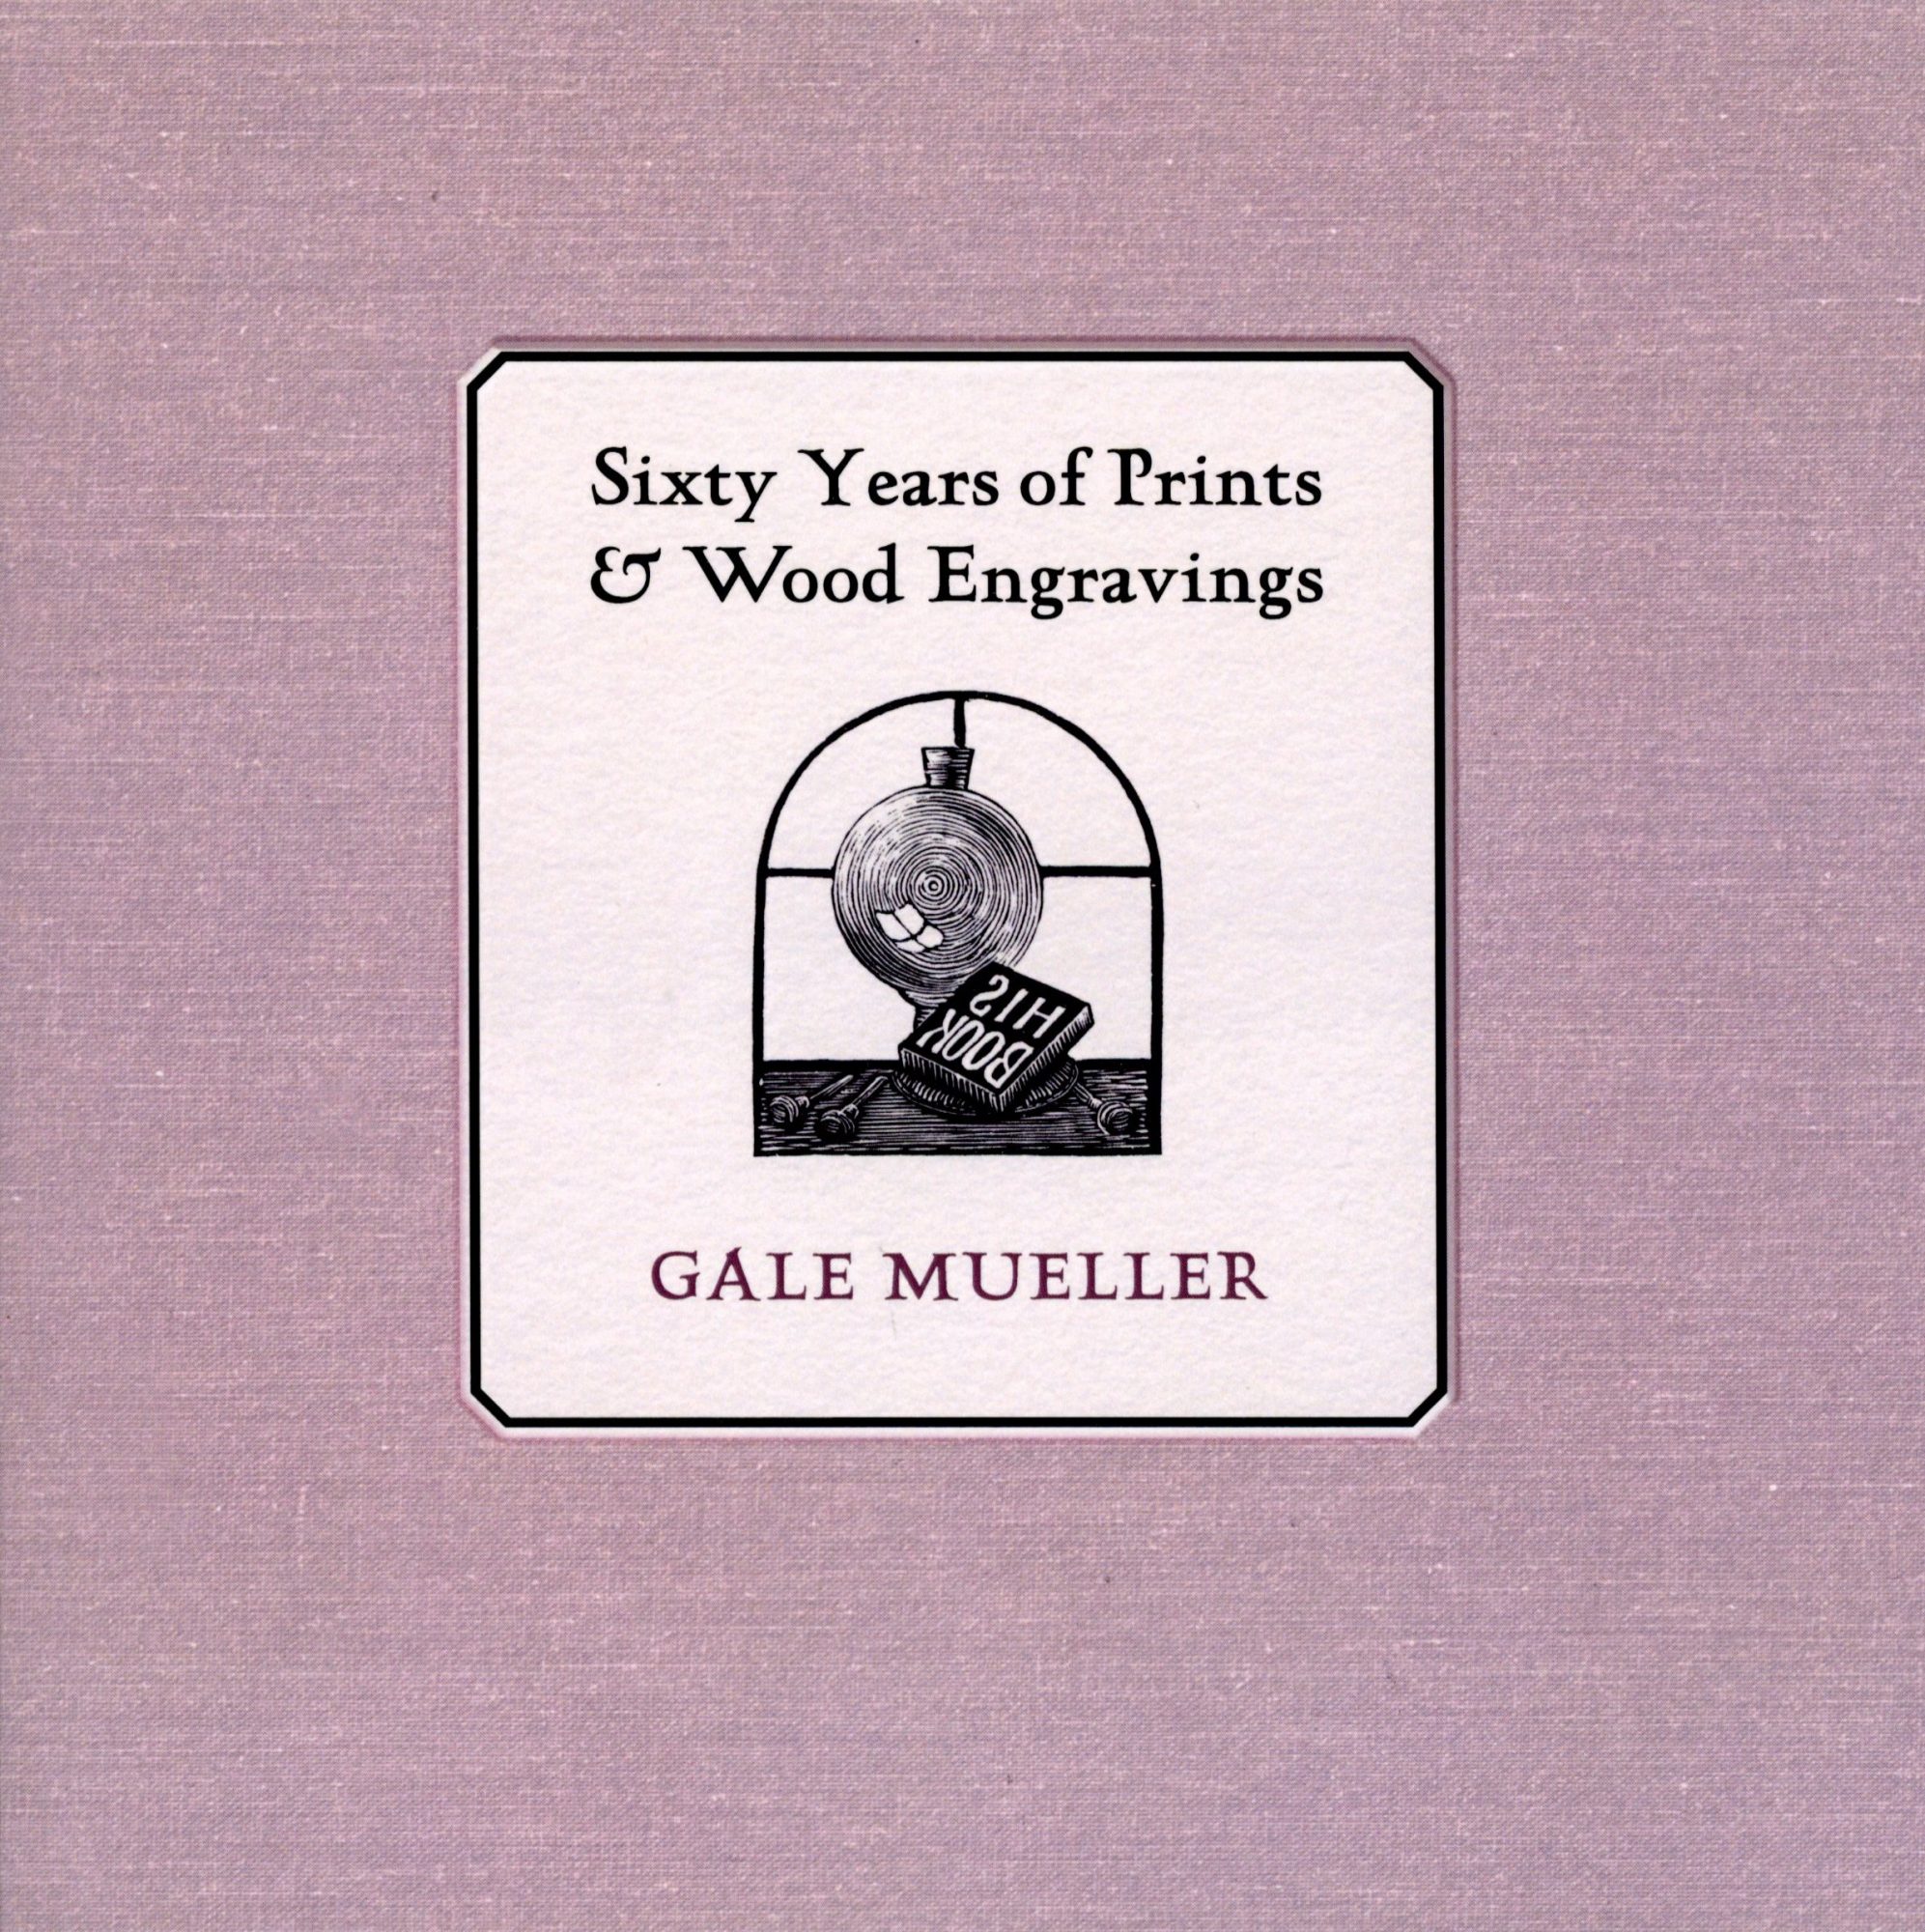 Image of the front cover of Sixty Years of Prints & Wood Engravings.